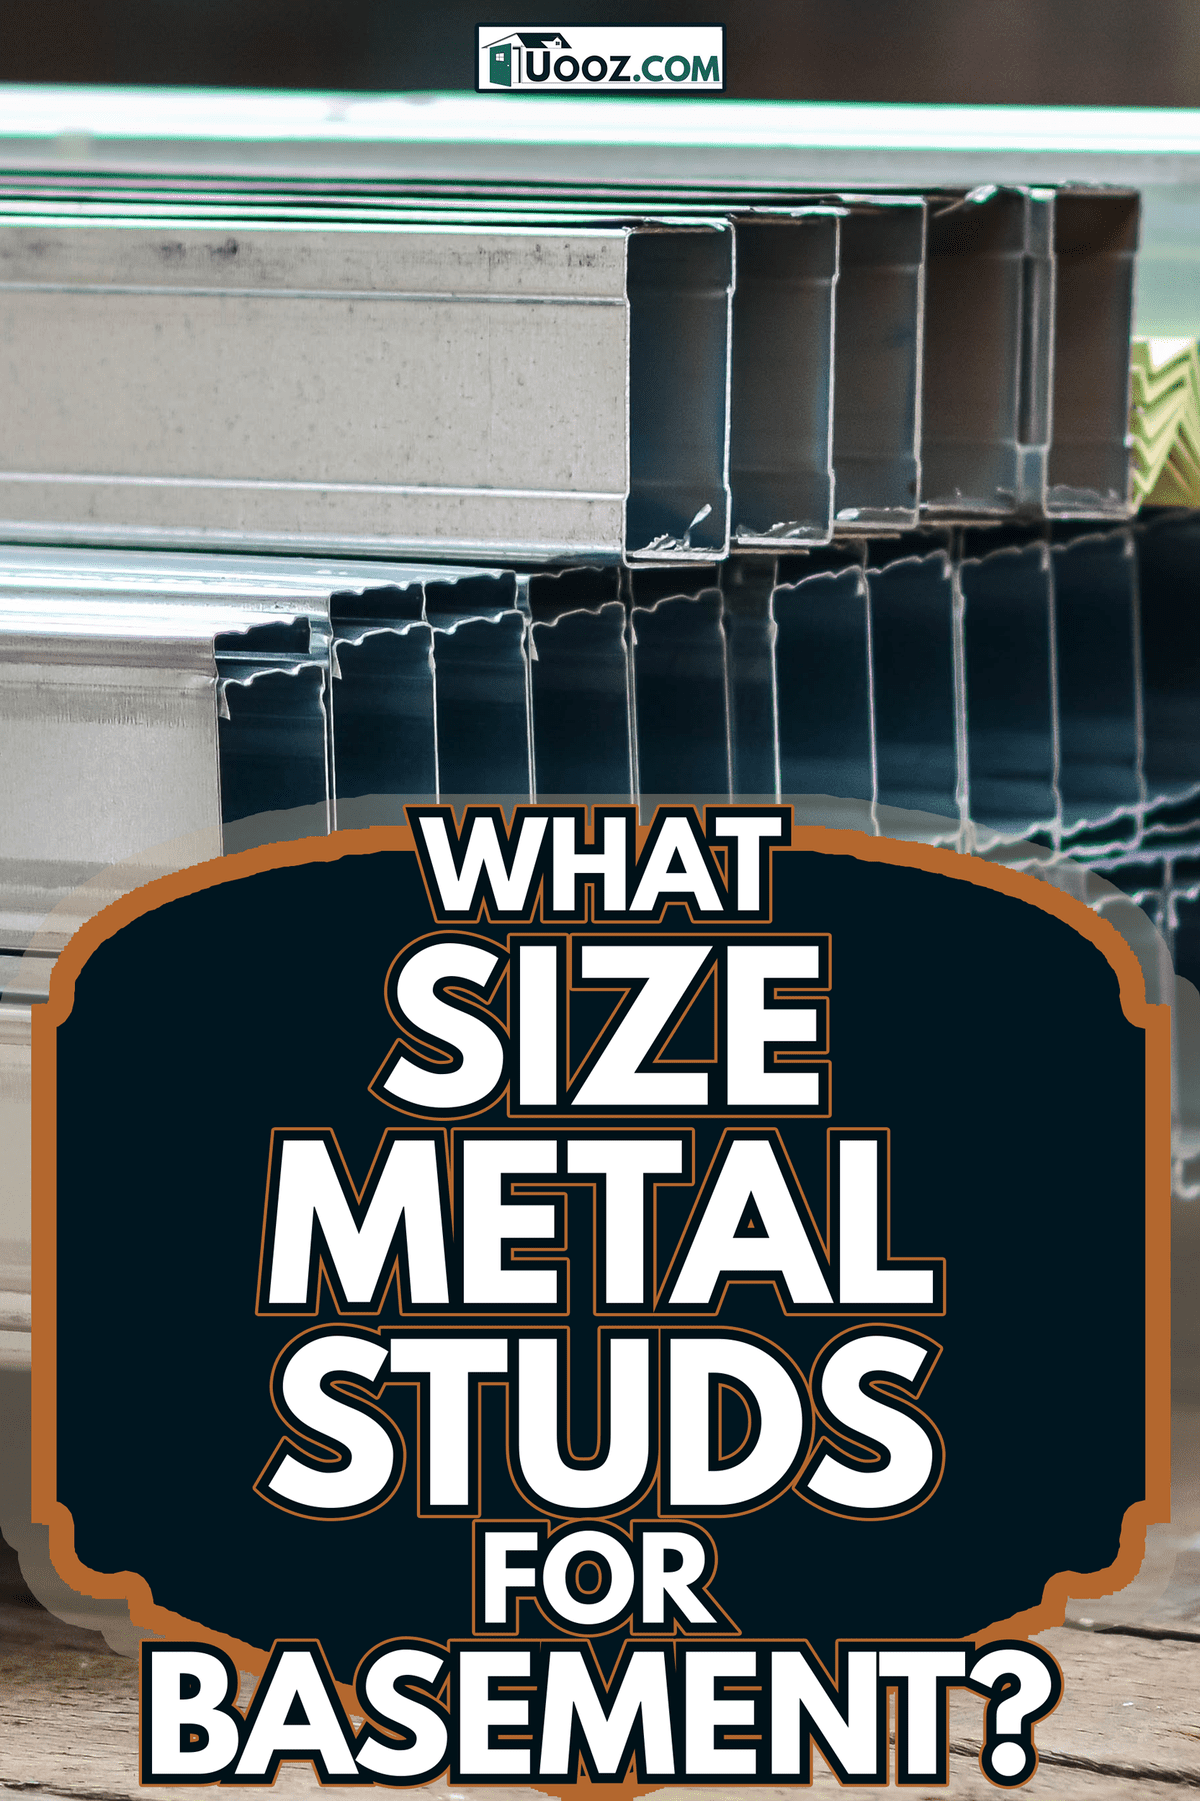 metal stud bundle outside construction zone - What Size Metal Studs For Basement